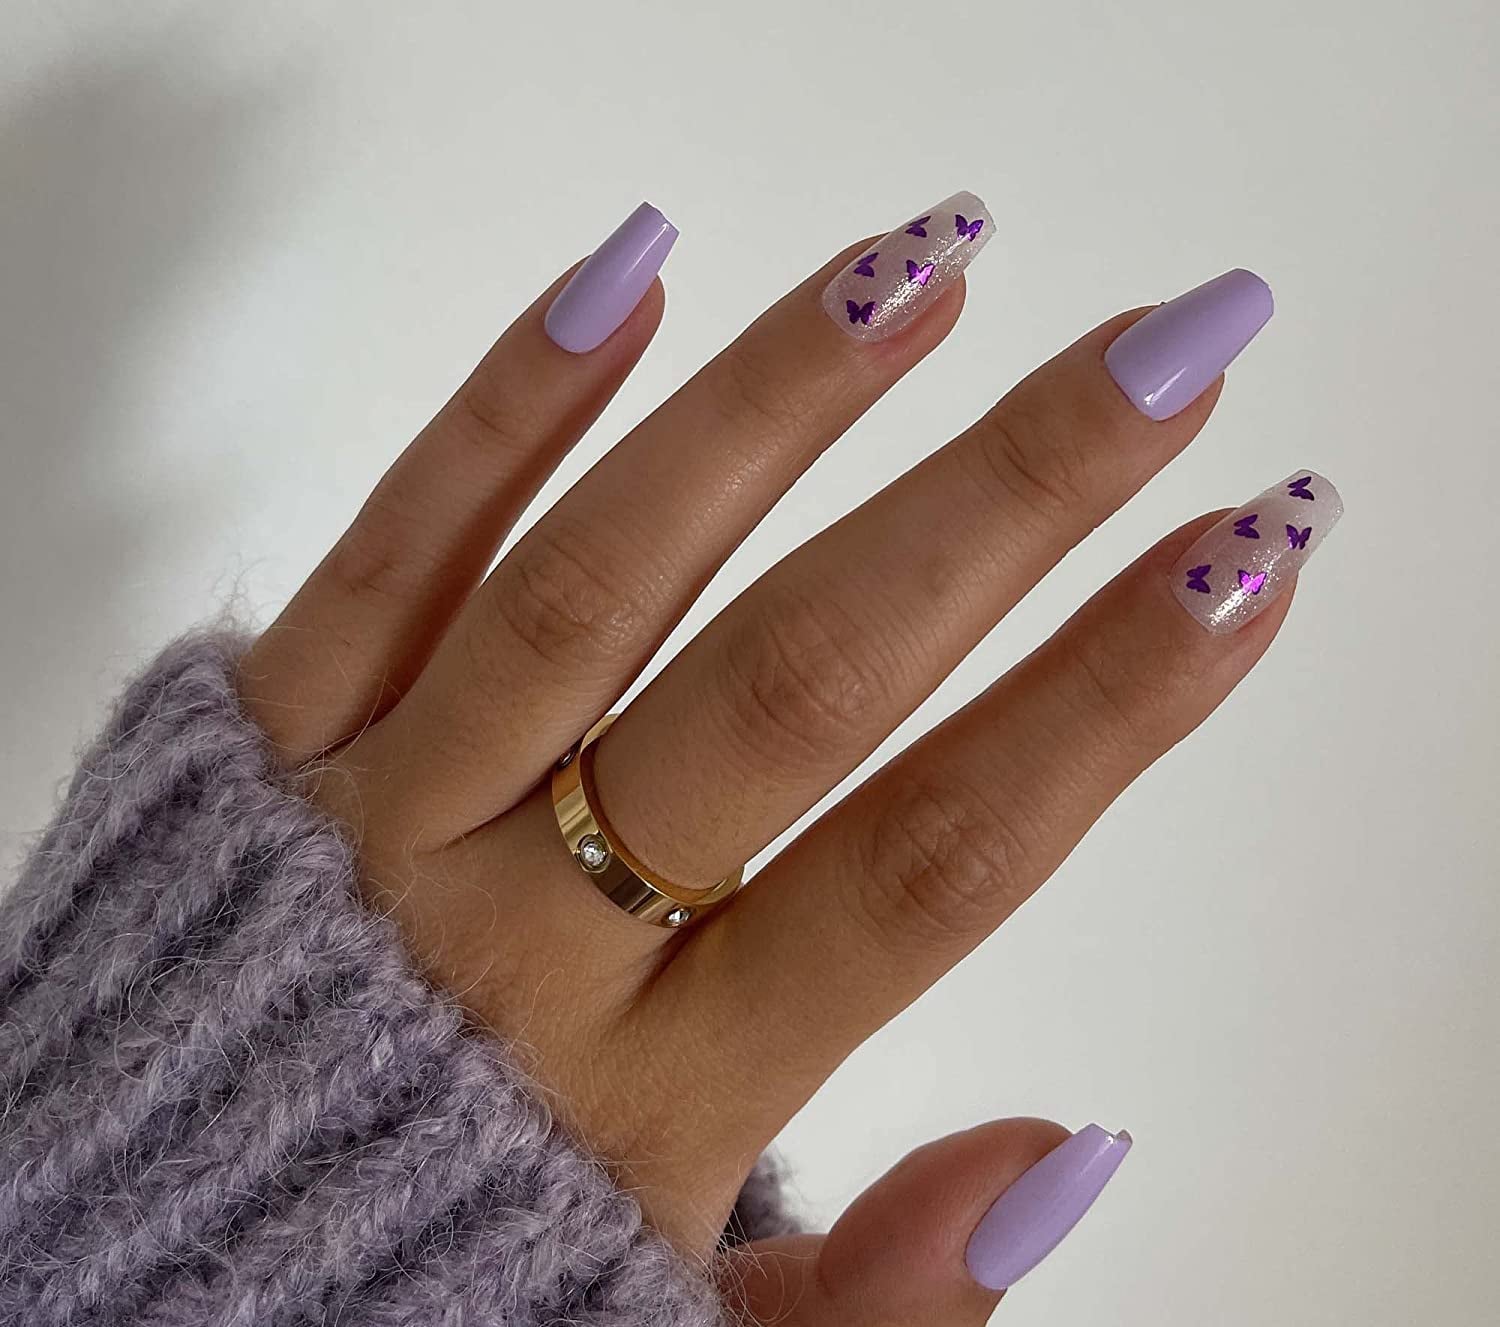 The 22 Best Press-On Nails to Try at Home